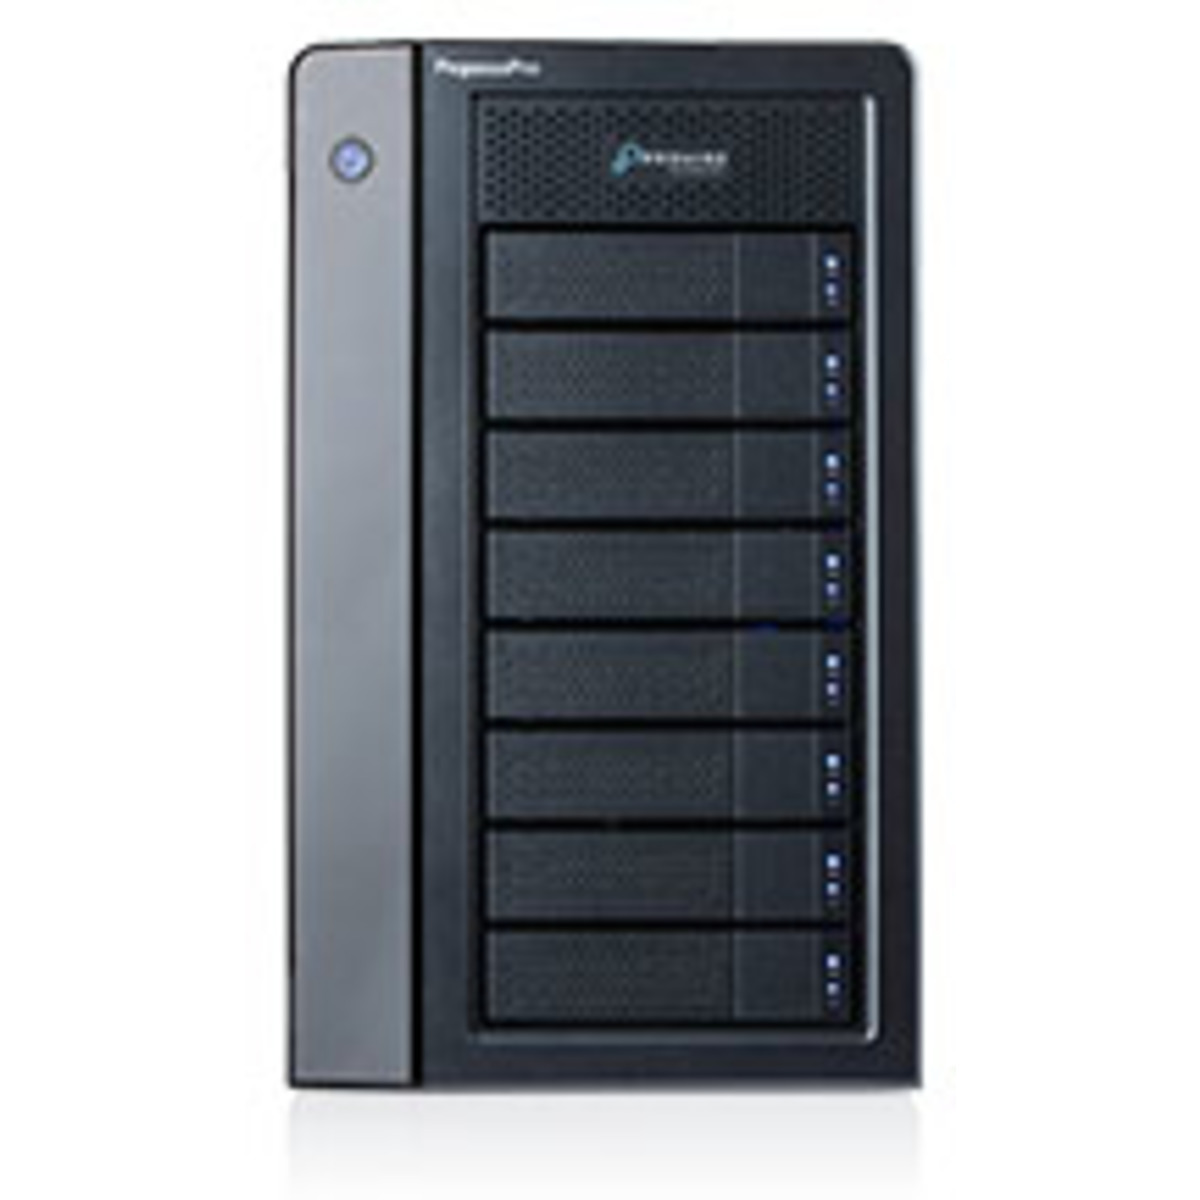 buy $13314 Promise Technology PegasusPro R8 64tb Desktop DAS-NAS - Combo Direct + Network Storage Device 8x8000gb Samsung 870 QVO MZ-77Q8T0 2.5 SATA 6Gb/s SSD CONSUMER Class Drives Installed - Burn-In Tested - nas headquarters buy network attached storage server device das new raid-5 free shipping usa christmas new year holiday sale PegasusPro R8